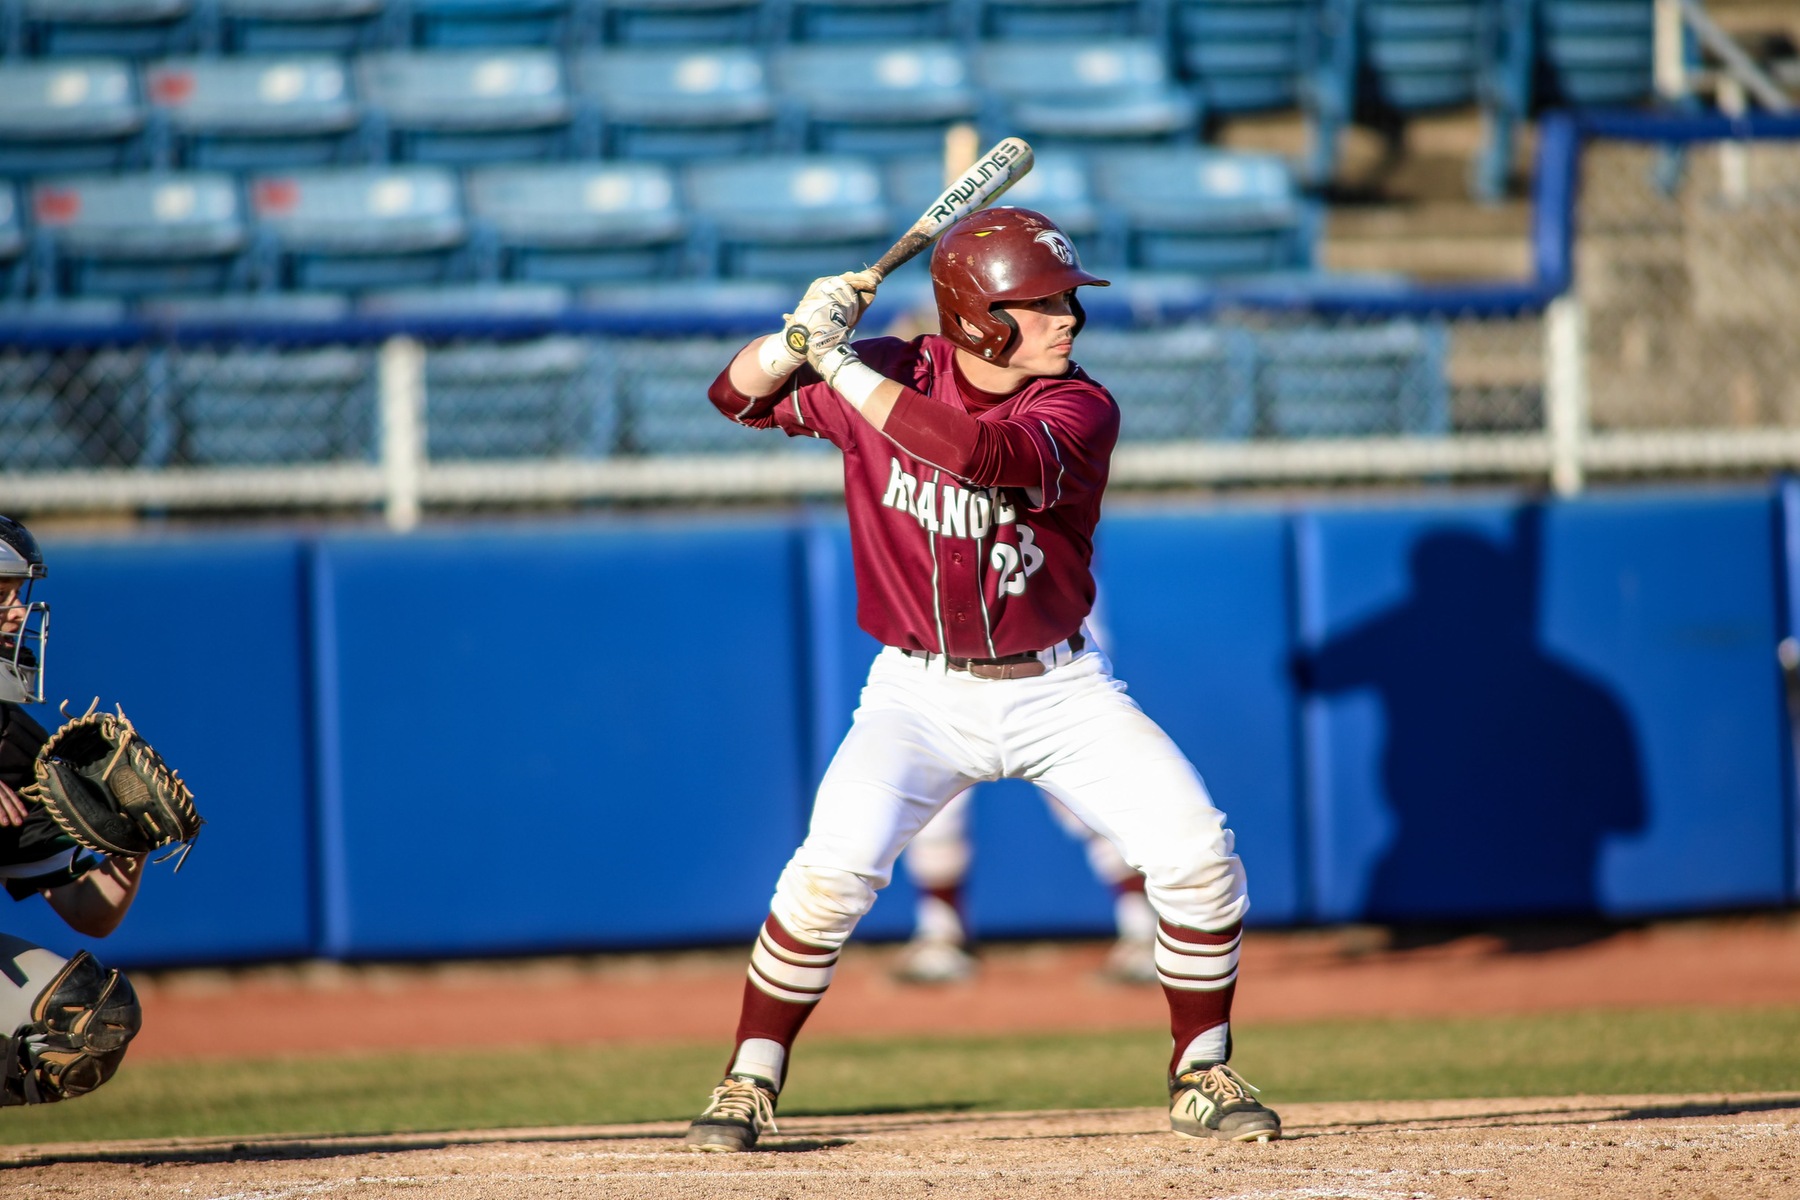 Roanoke posted wins over (R/V) Piedmont and No. 25 Christopher Newport on Saturday